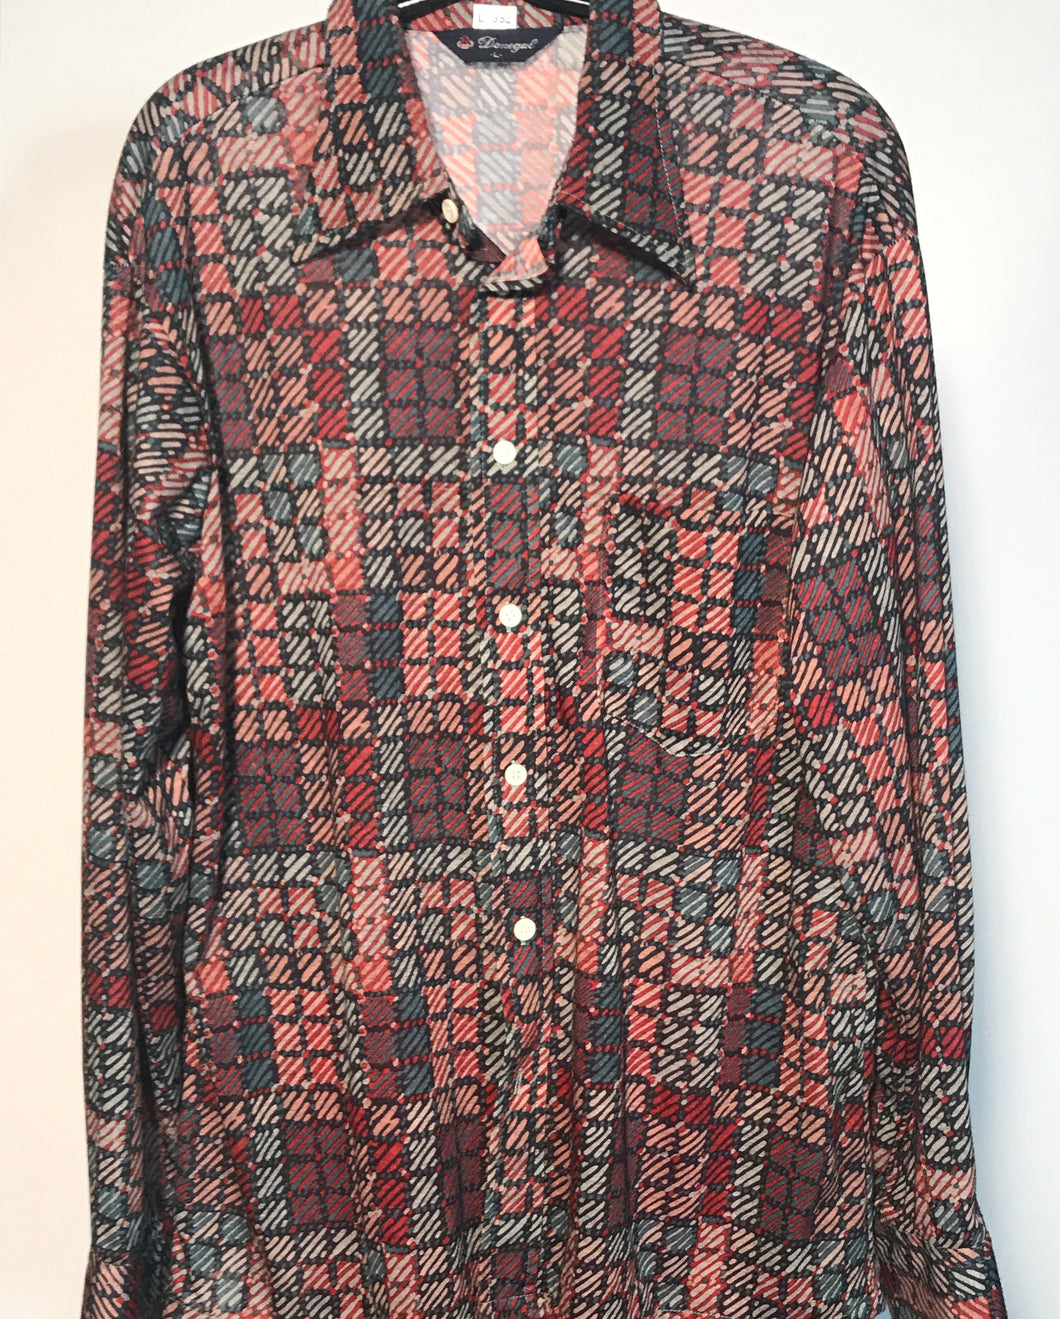 1970s Checked Pattern 1970s Long Sleeve Button Down Shirt RENTAL L952